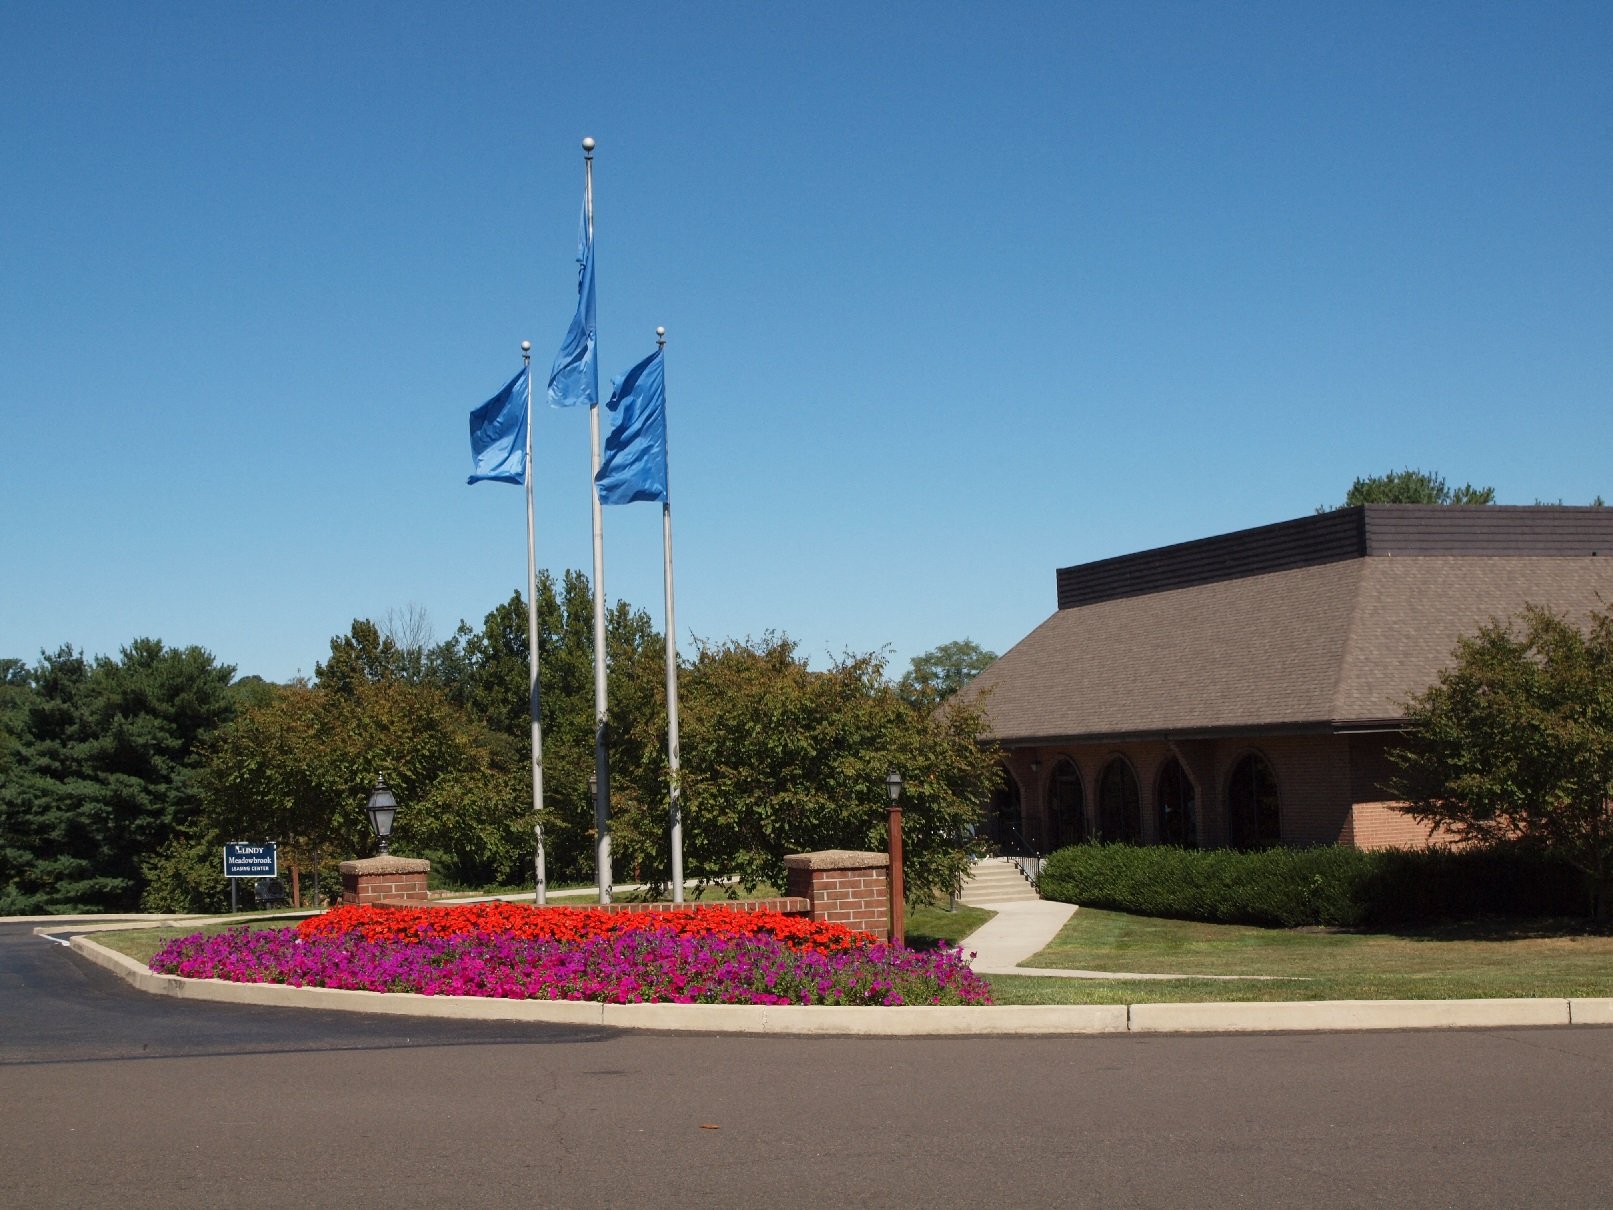 Exterior of clubhouse, showing flowerbed and flags